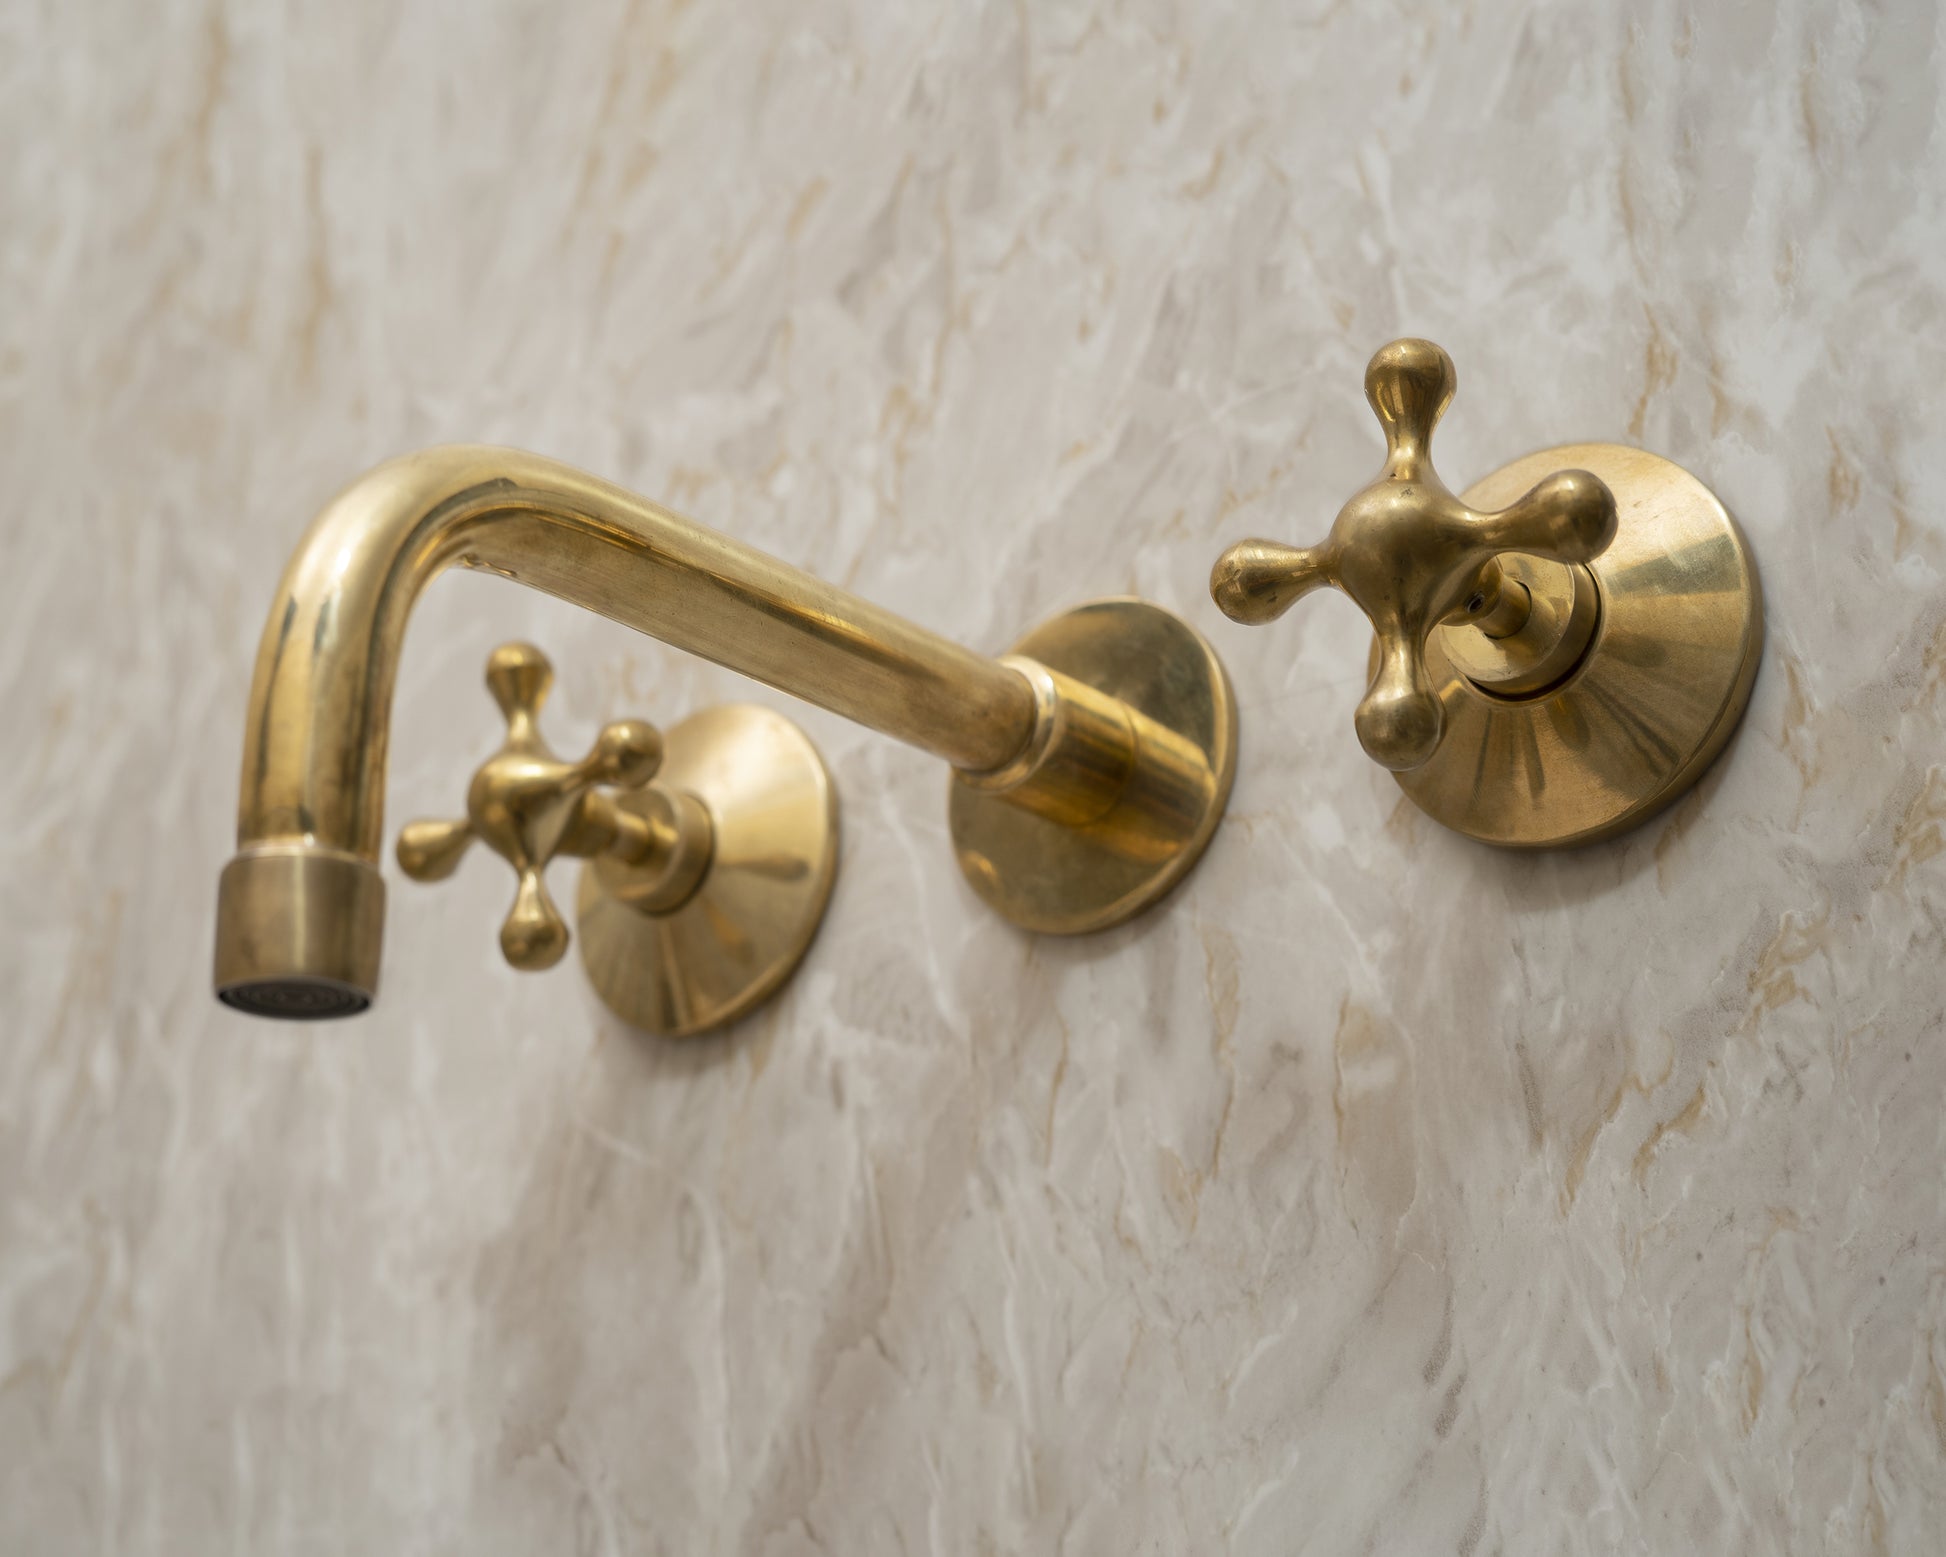  Wall Mounted Faucet With Cross Handles